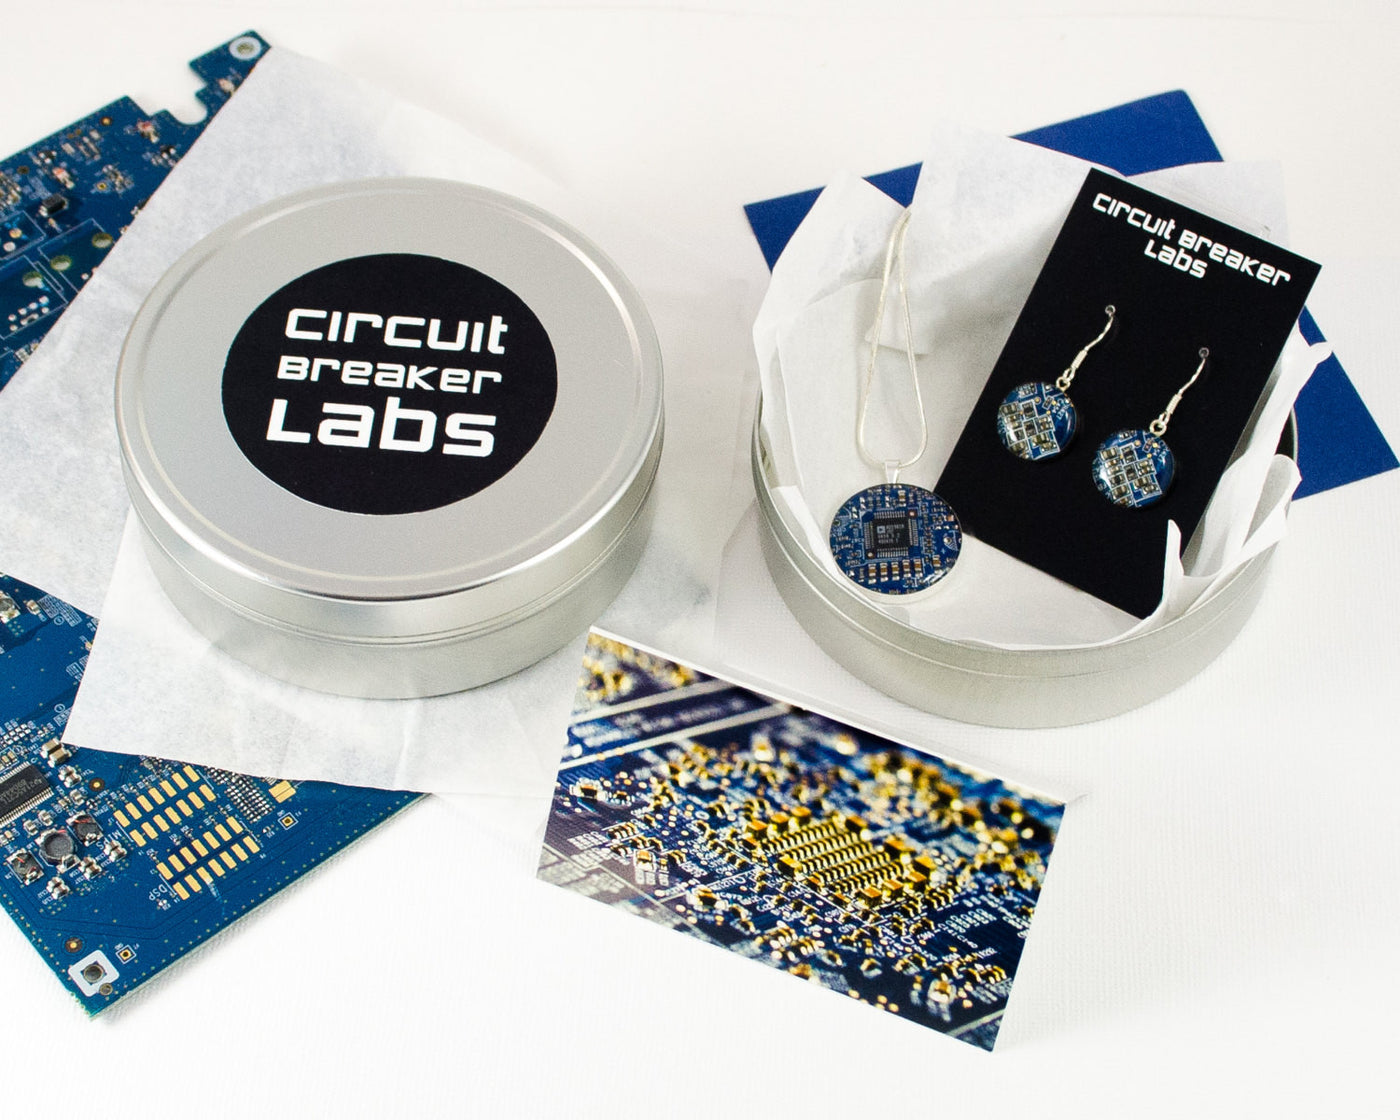 Circuit Board Gift Set - Keychain, Tie Bar and Magnet